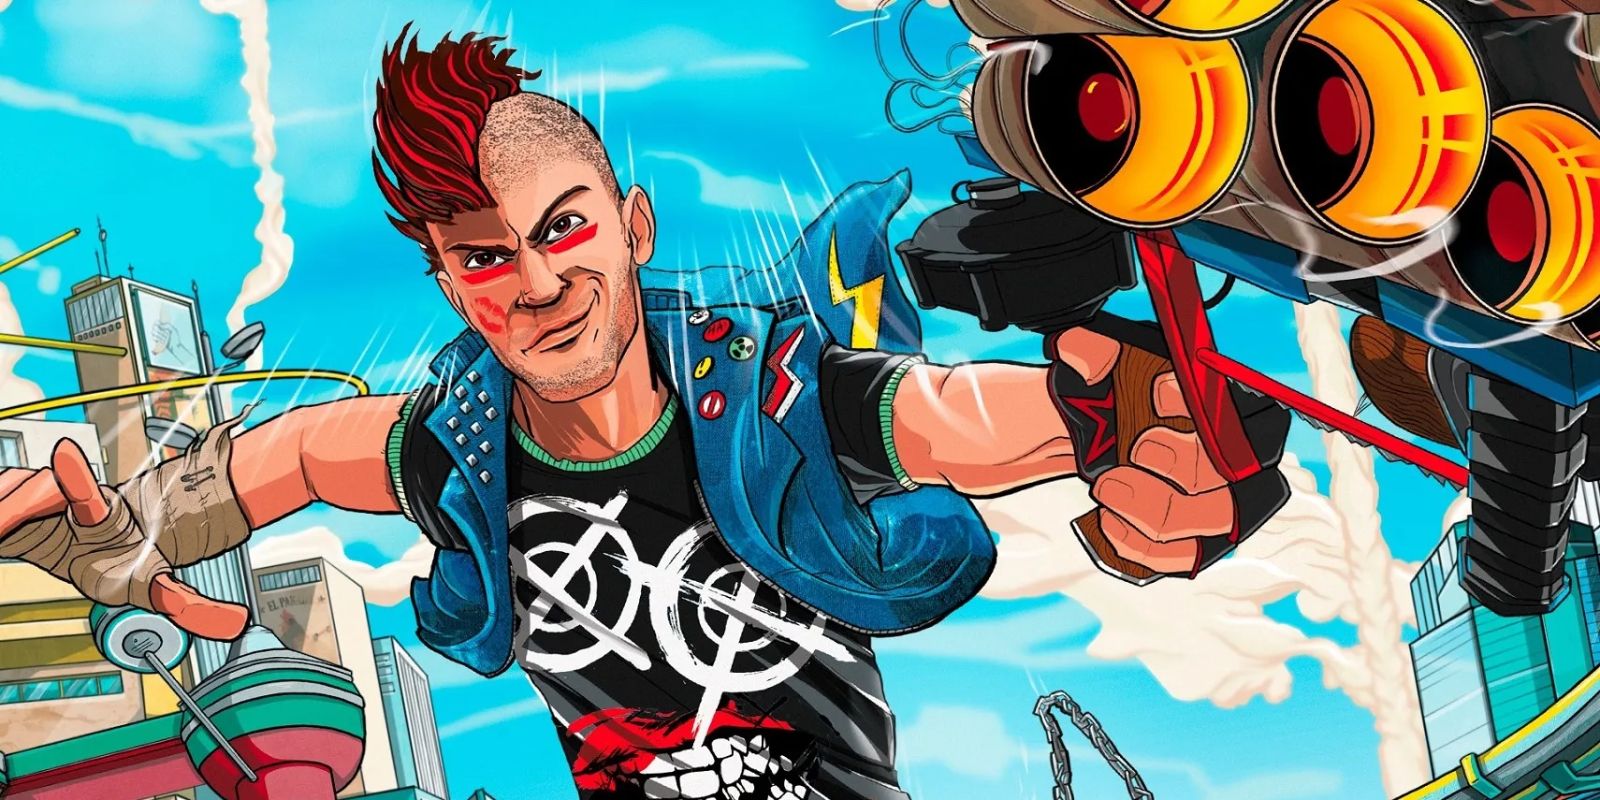 Xbox One Exclusive Sunset Overdrive Finally Confirmed For PC - GameSpot